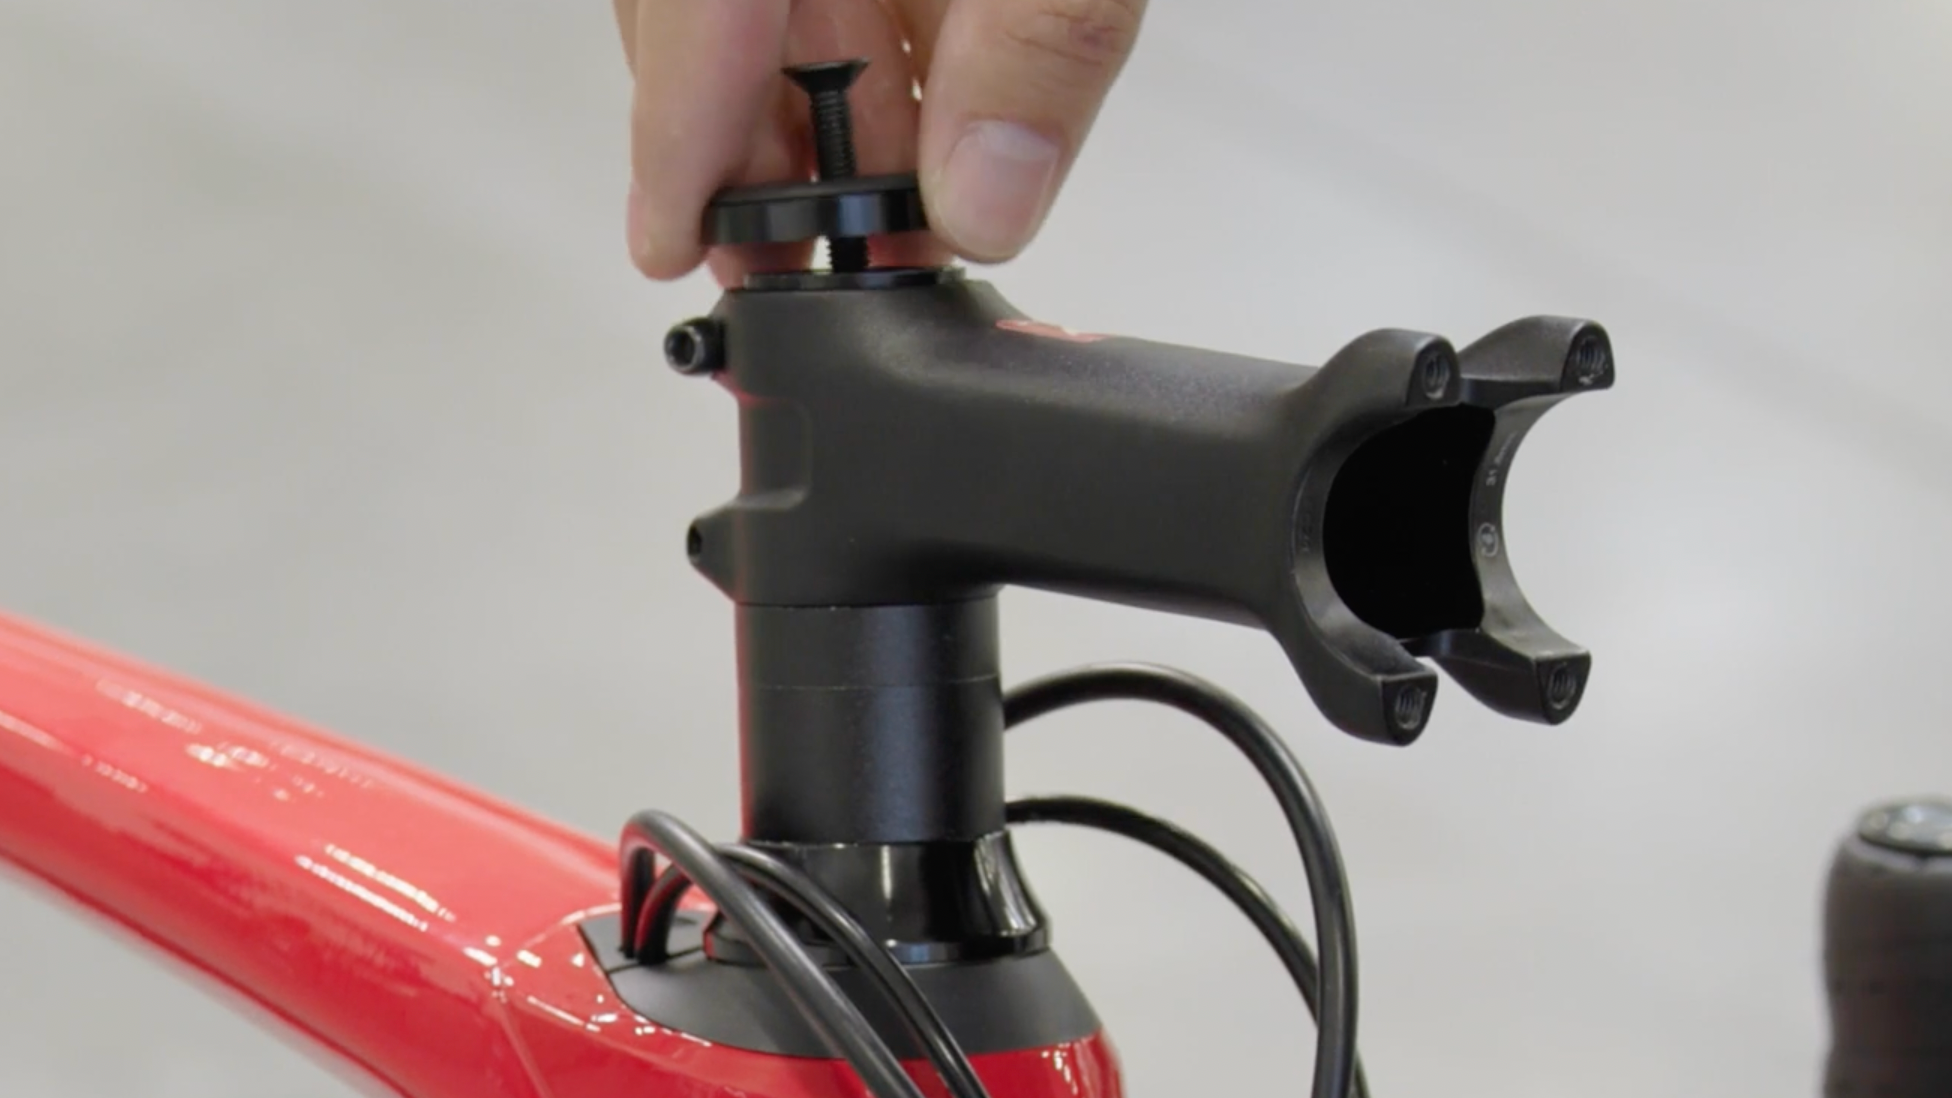 How to adjust or change bike stem headset top cap removal